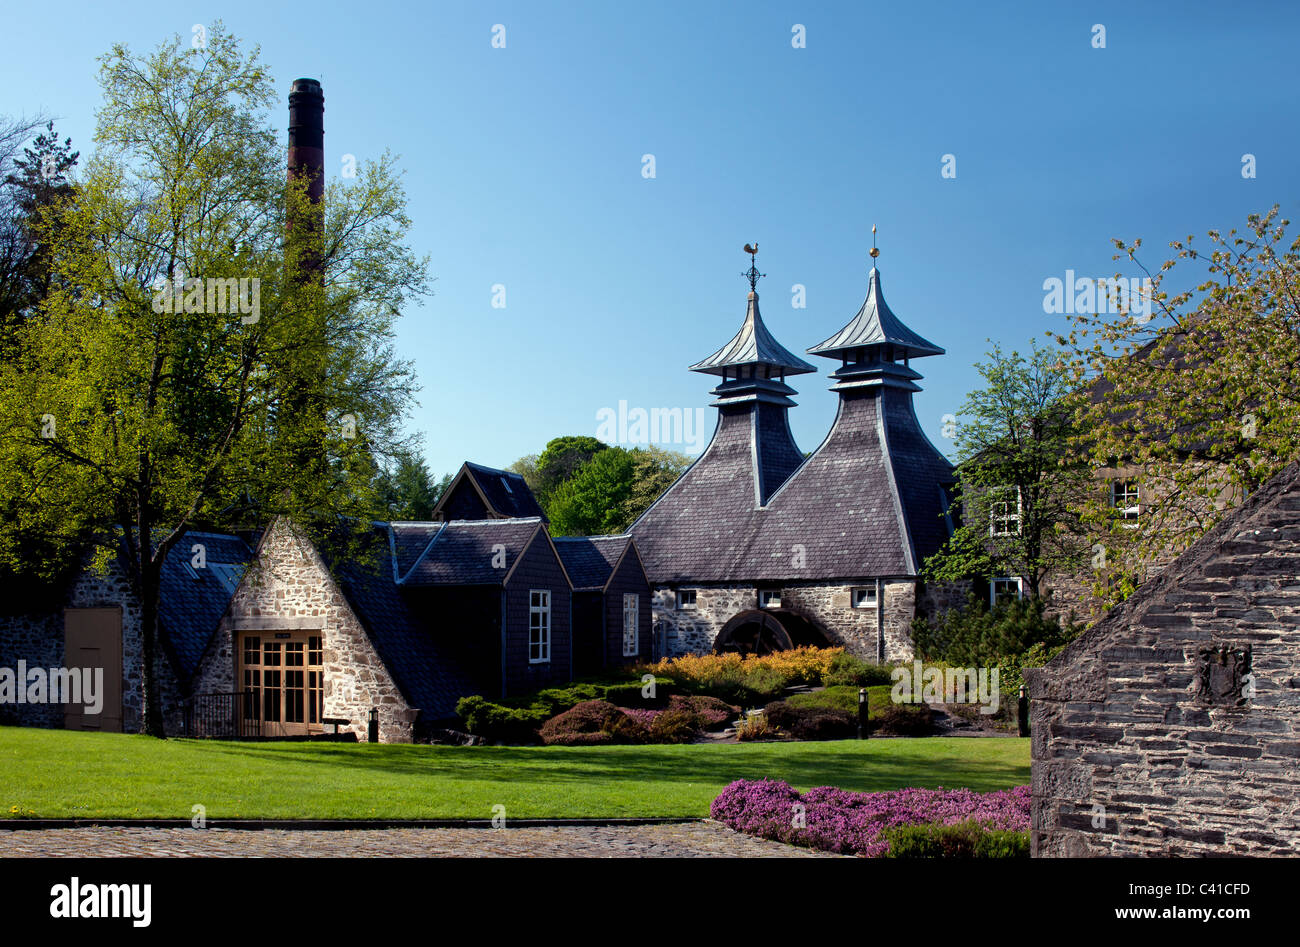 Springtime shot of Strathisla Distillery, with Spring flowers, in Keith, Banffshire, Scotland (Moray Firth) Stock Photo